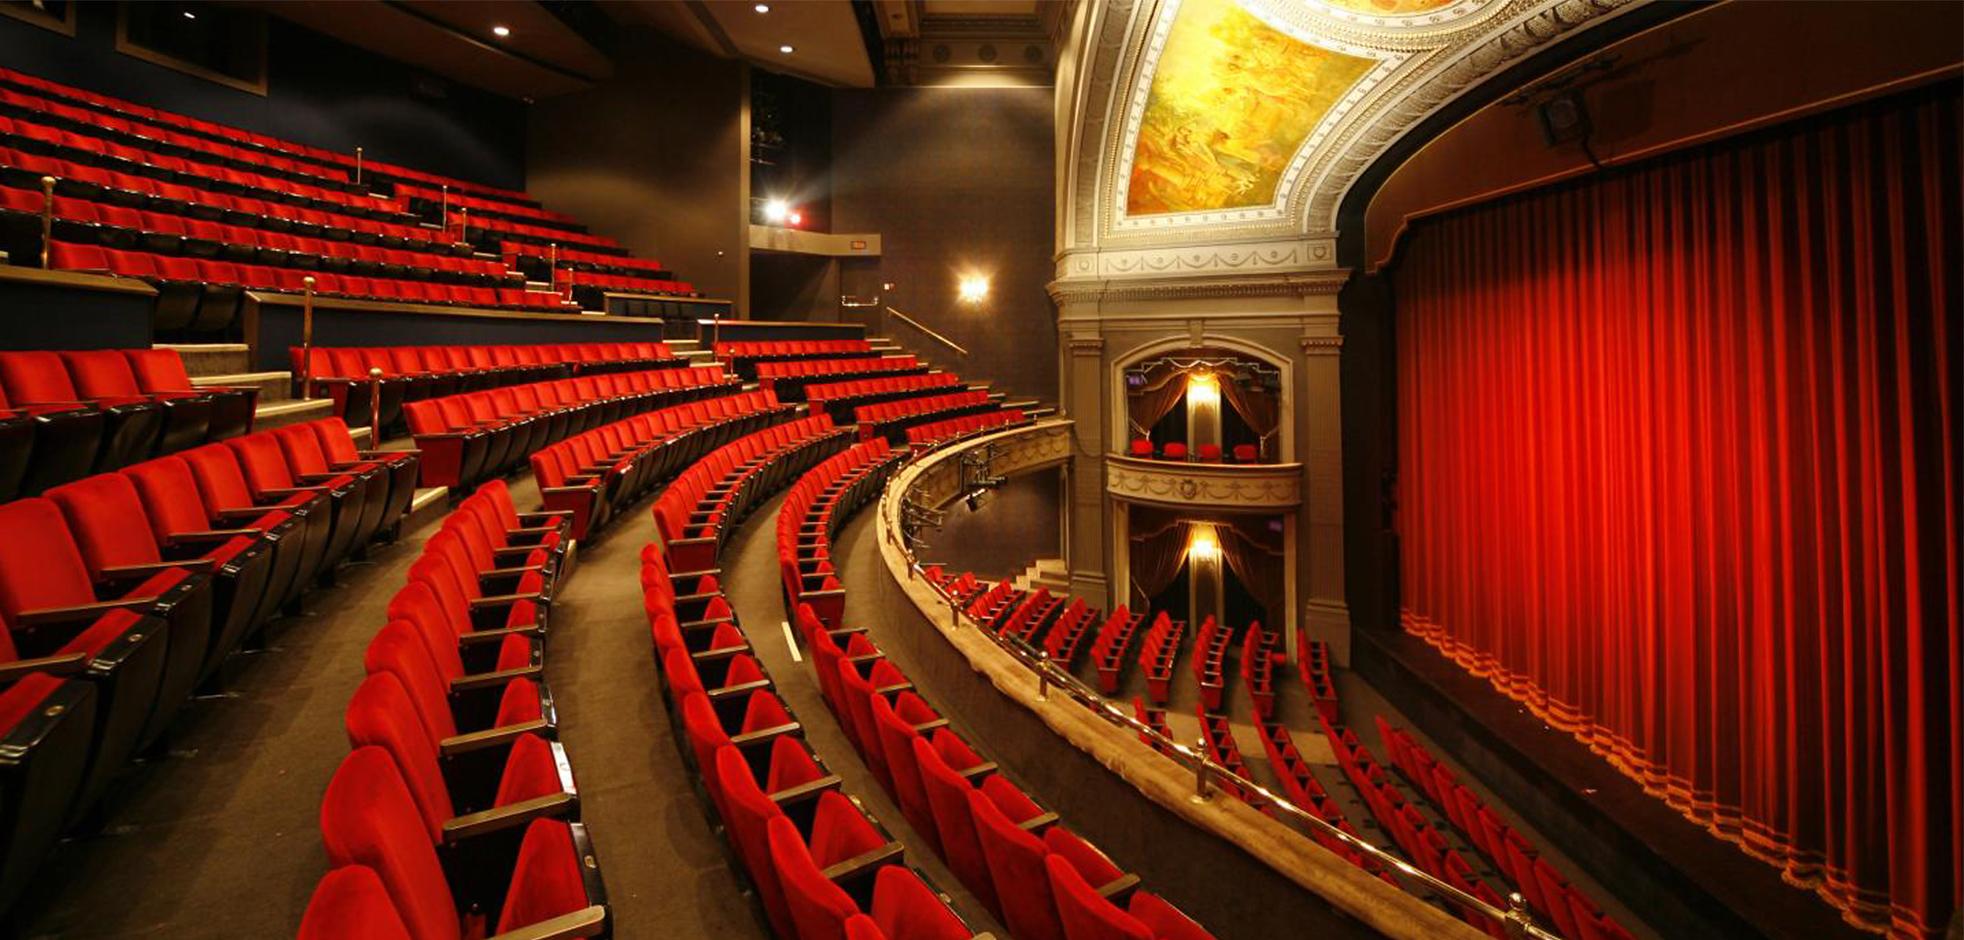 Interior stage view of the Grand Theatre in London, Ontario